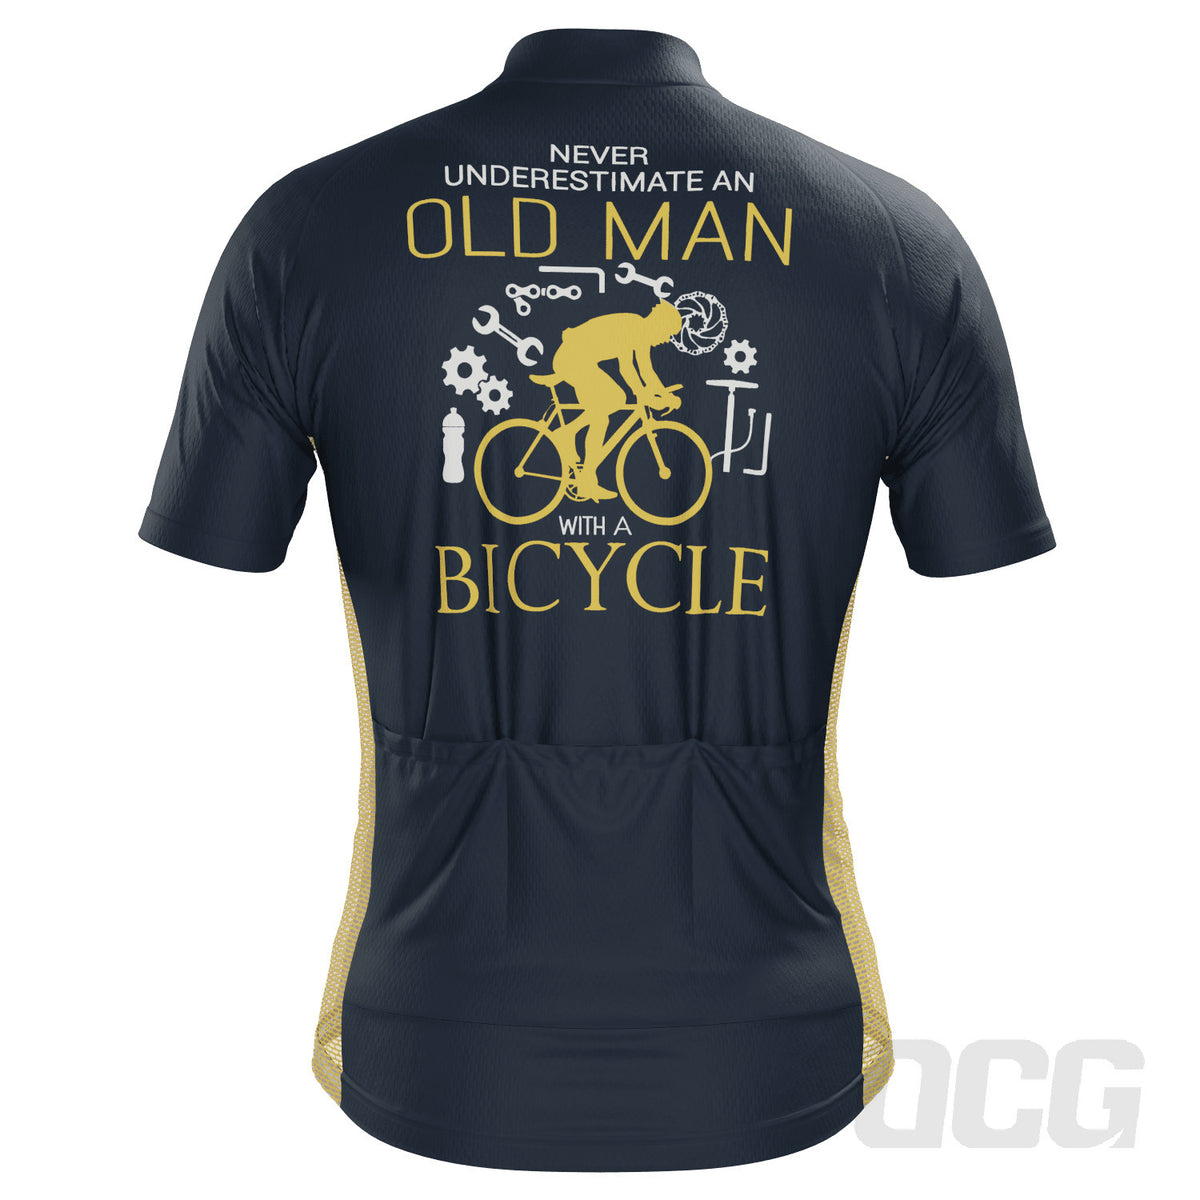 Men's Never Underestimate an Old Man Short Sleeve Cycling Jersey ...